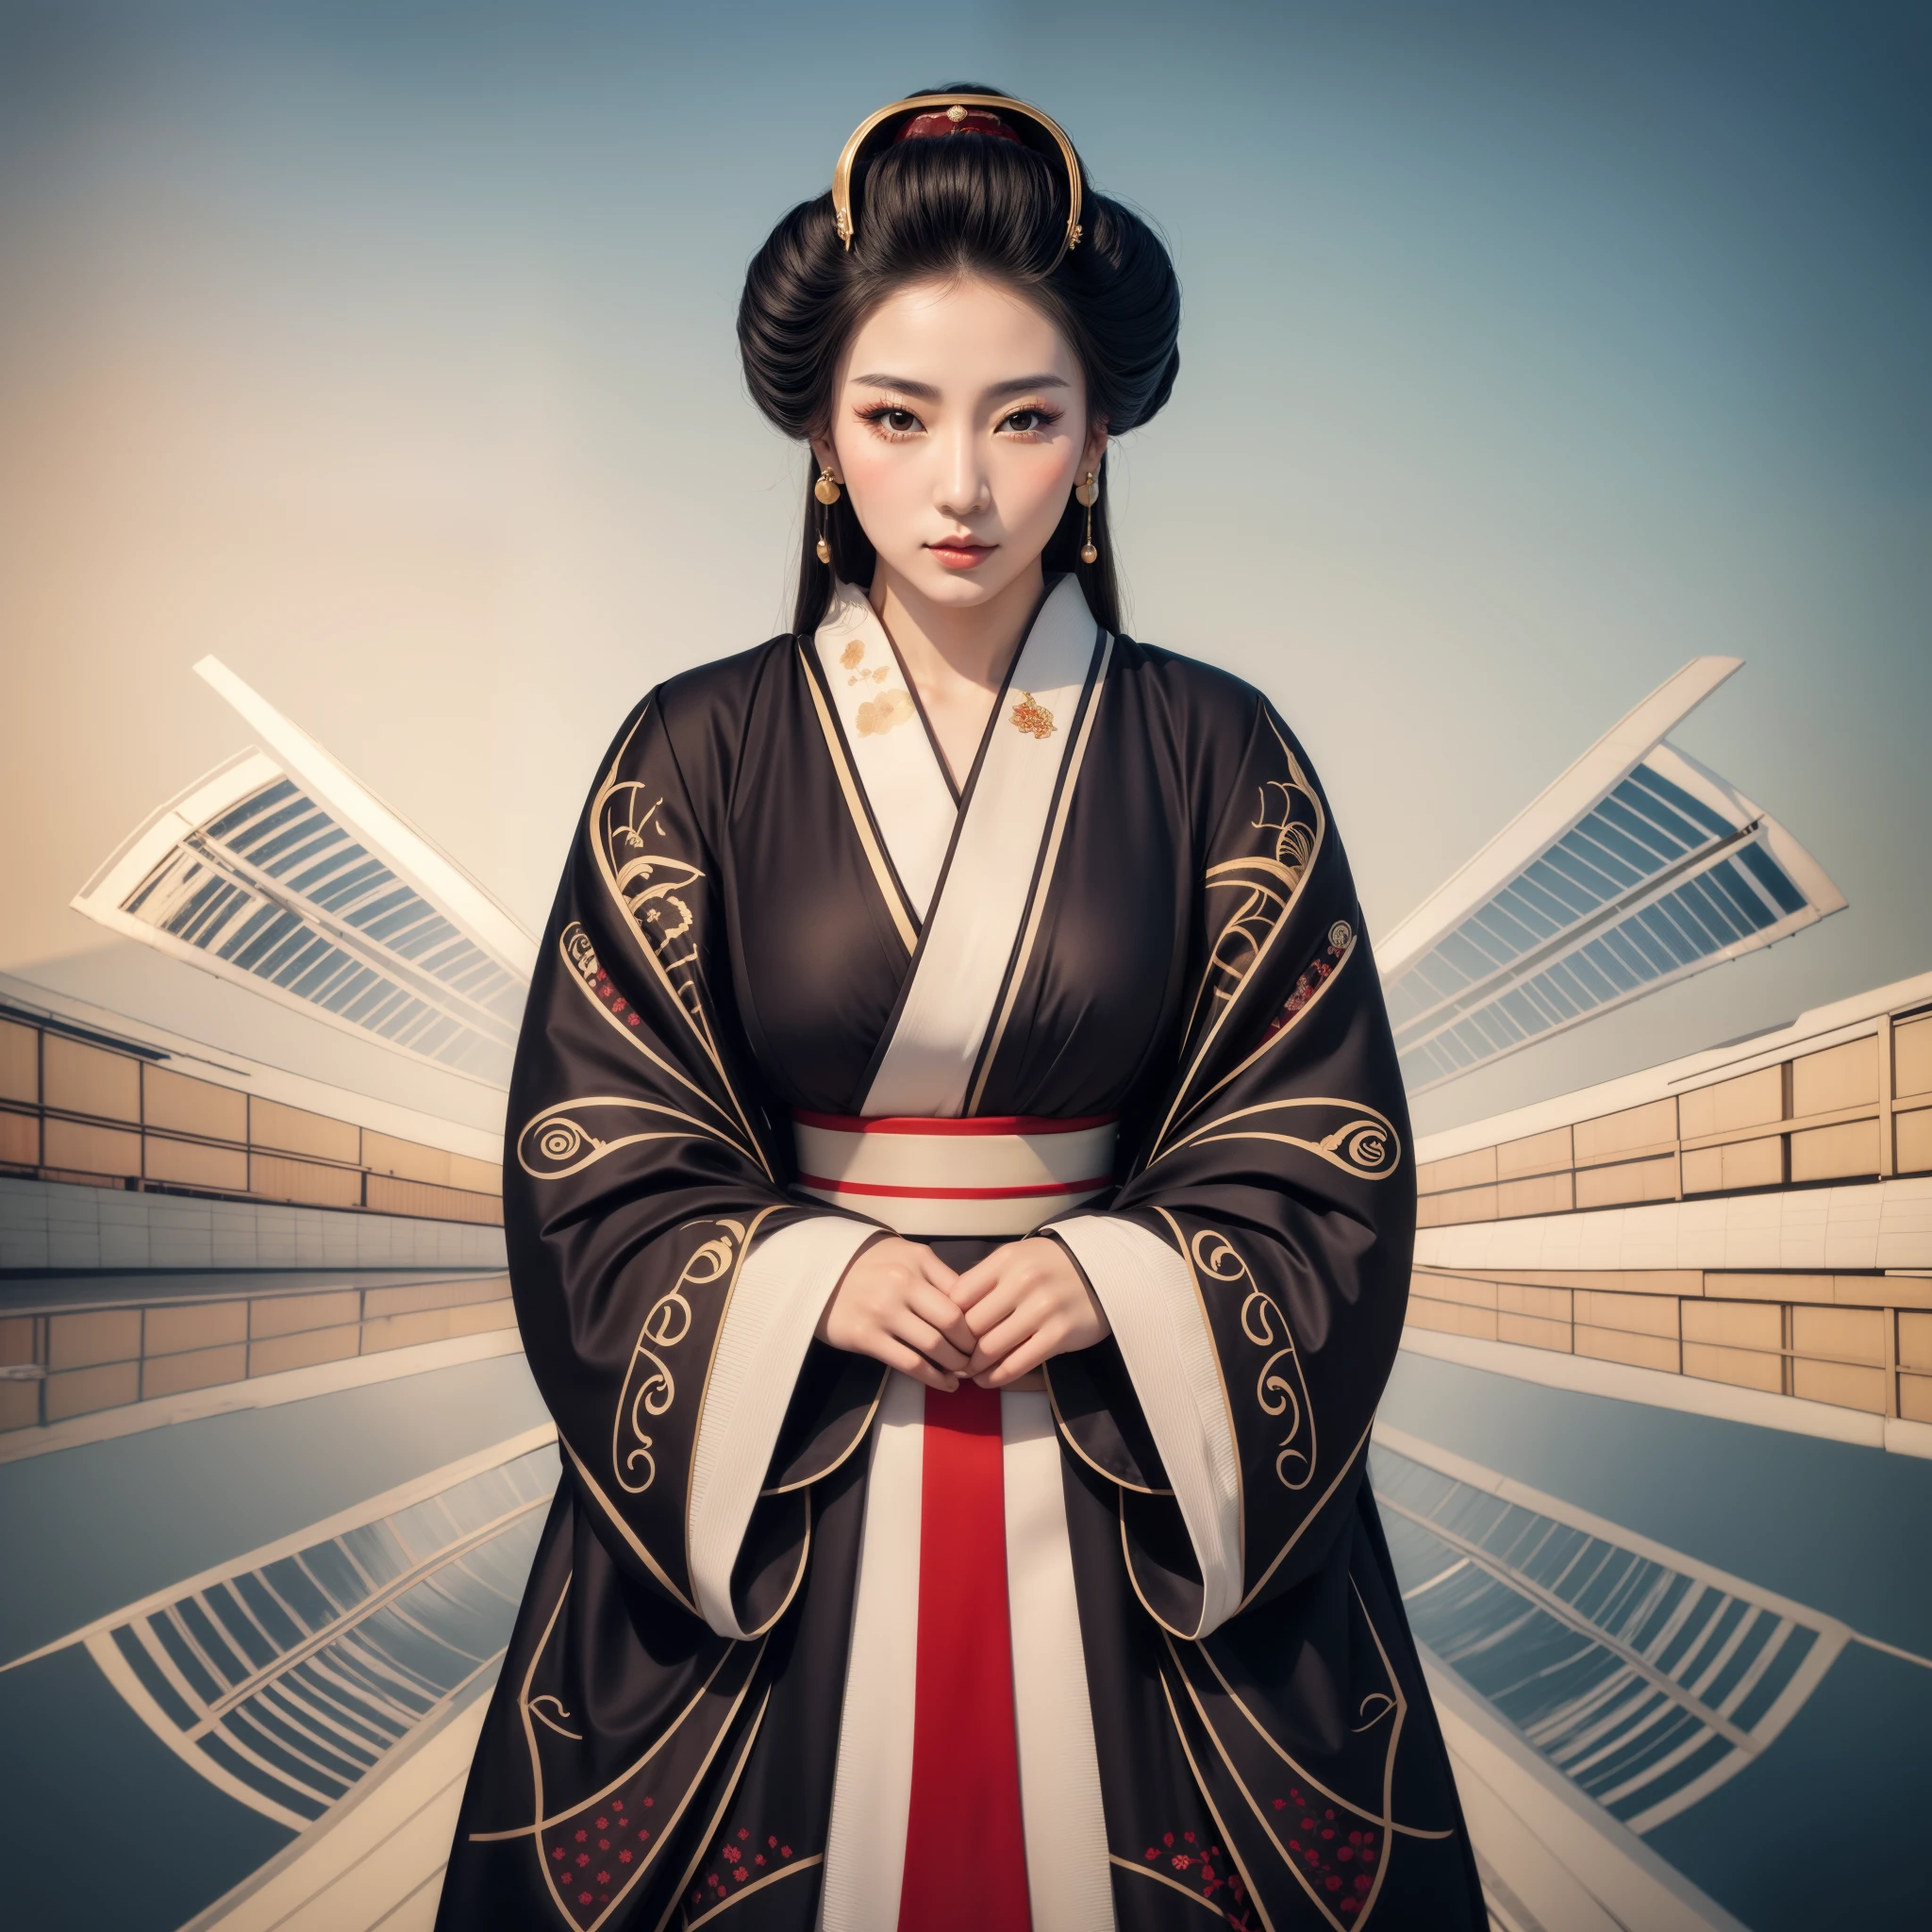 a beautiful young geisha, with full lips, full breasts, silky skin, beautiful eyes, black hair, wearing earrings, and wearing a stylized black kimono, with the propeller of a windmill in the background, hyperrealistic portrait of a beautiful geisha, woman elegant japanese woman, Geisha photorealistic portrait, Beauty geisha, japanese geisha, Japanese woman, exquisite intricate details portrait of a geisha.